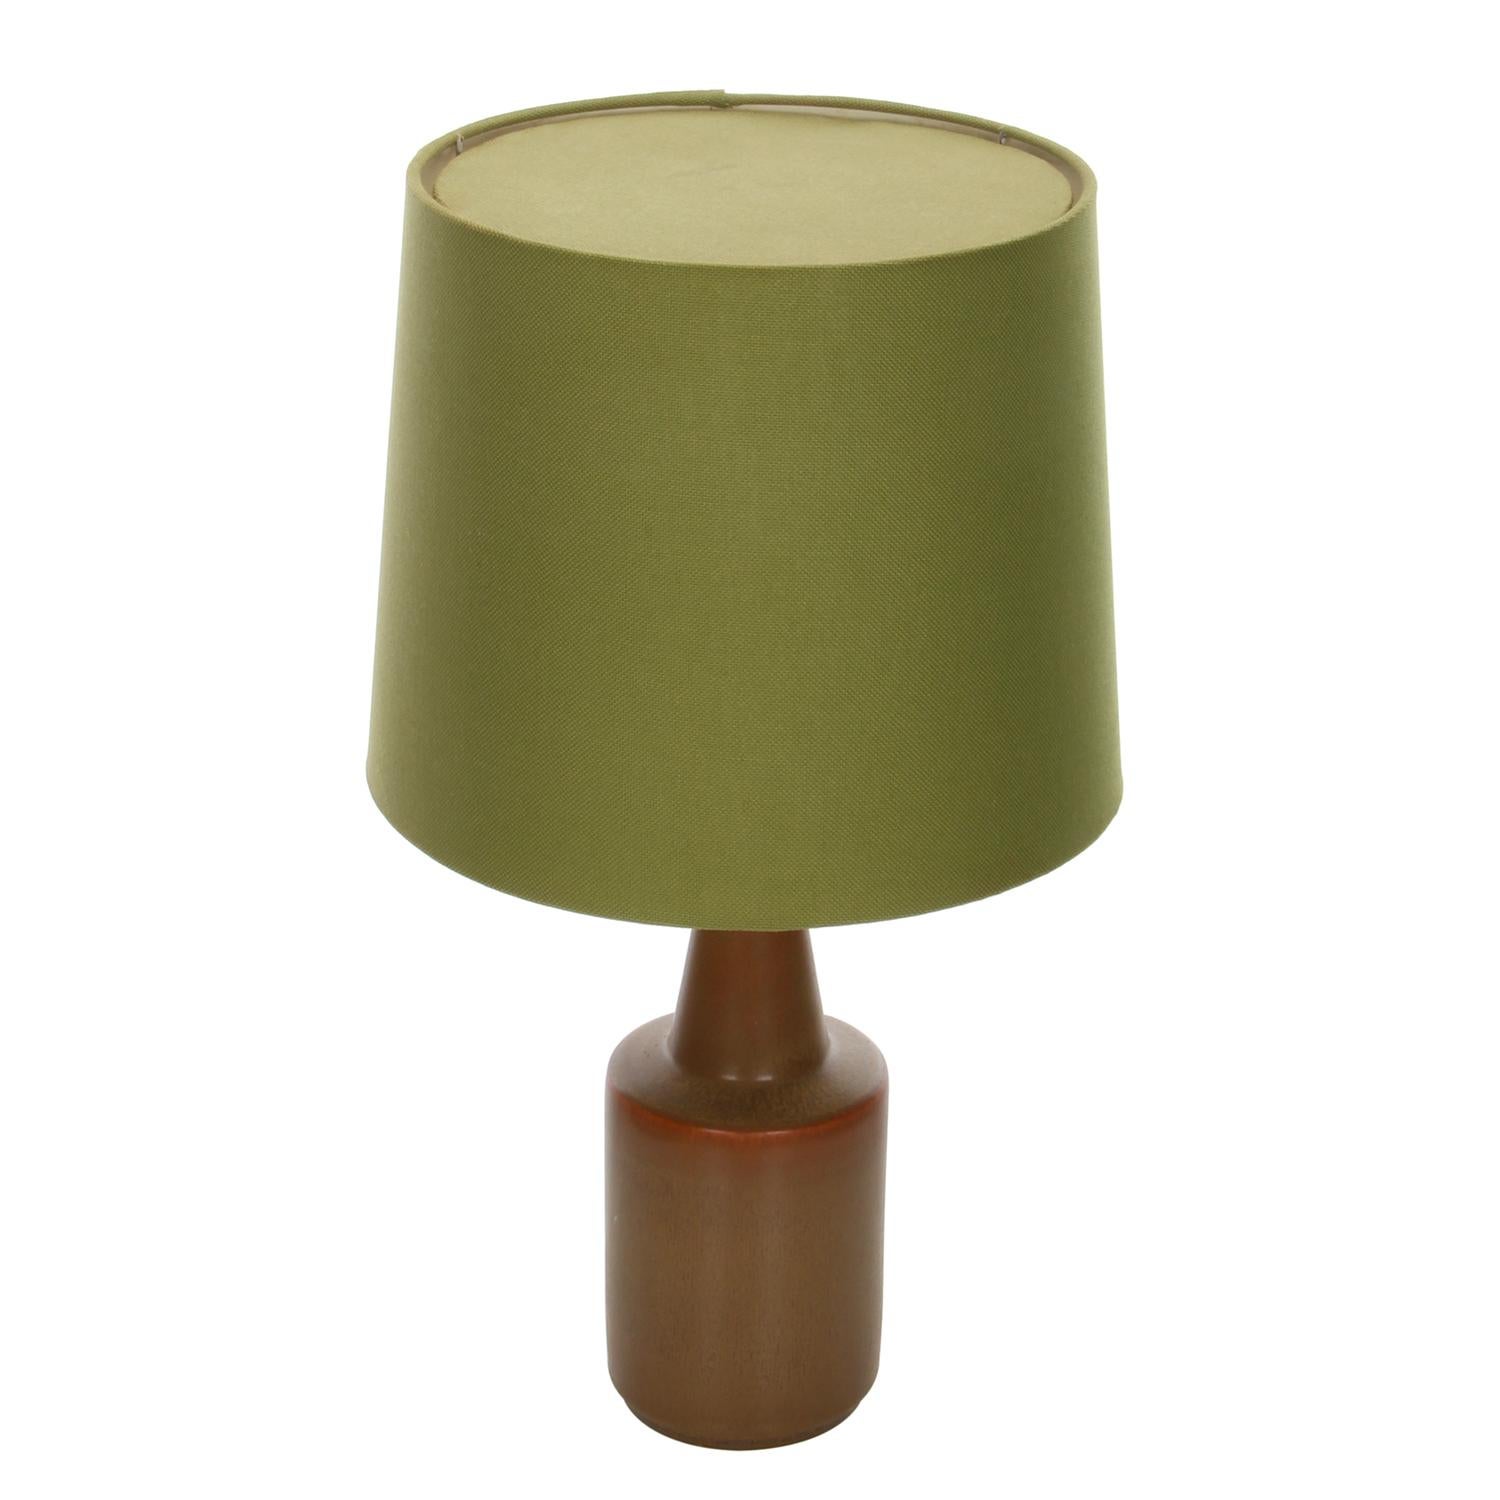 Glazed Ceramic Table Lamp with Vintage Shade by Einar Johansen for Soholm, 1960s